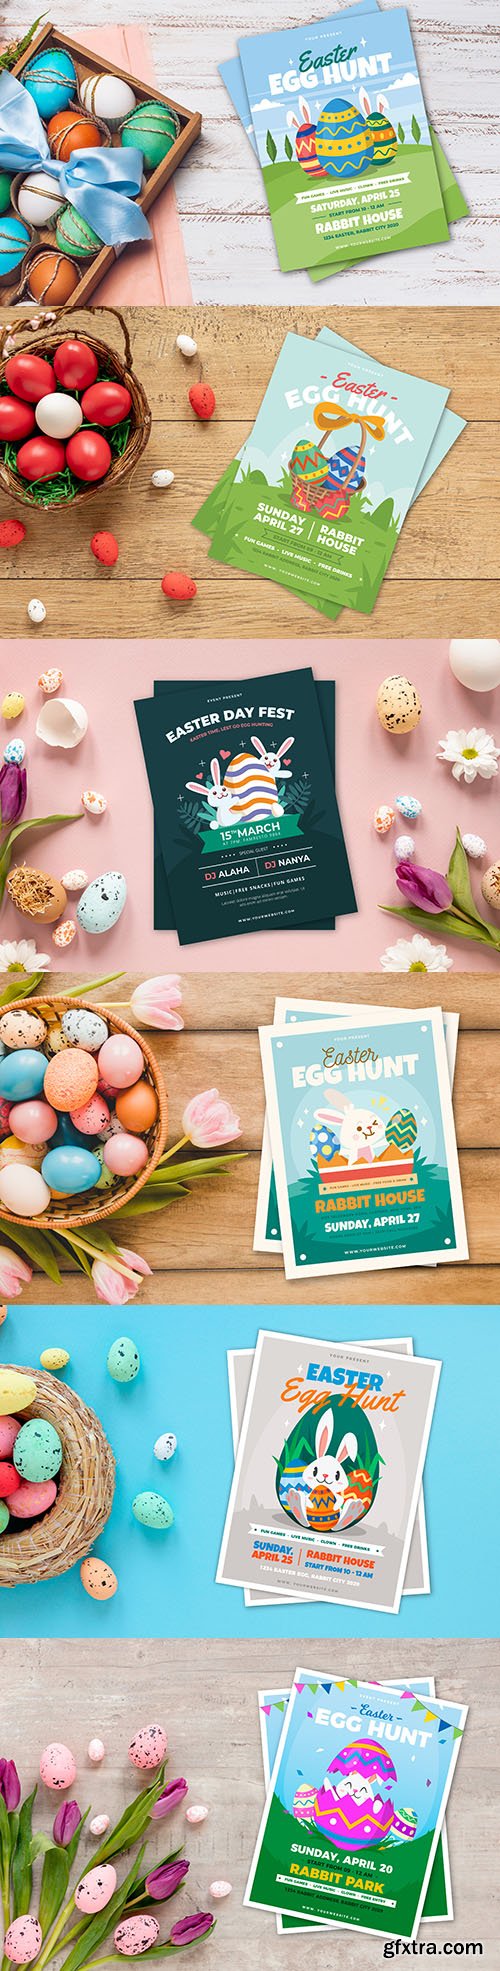 Easter party poster and basket with eggs